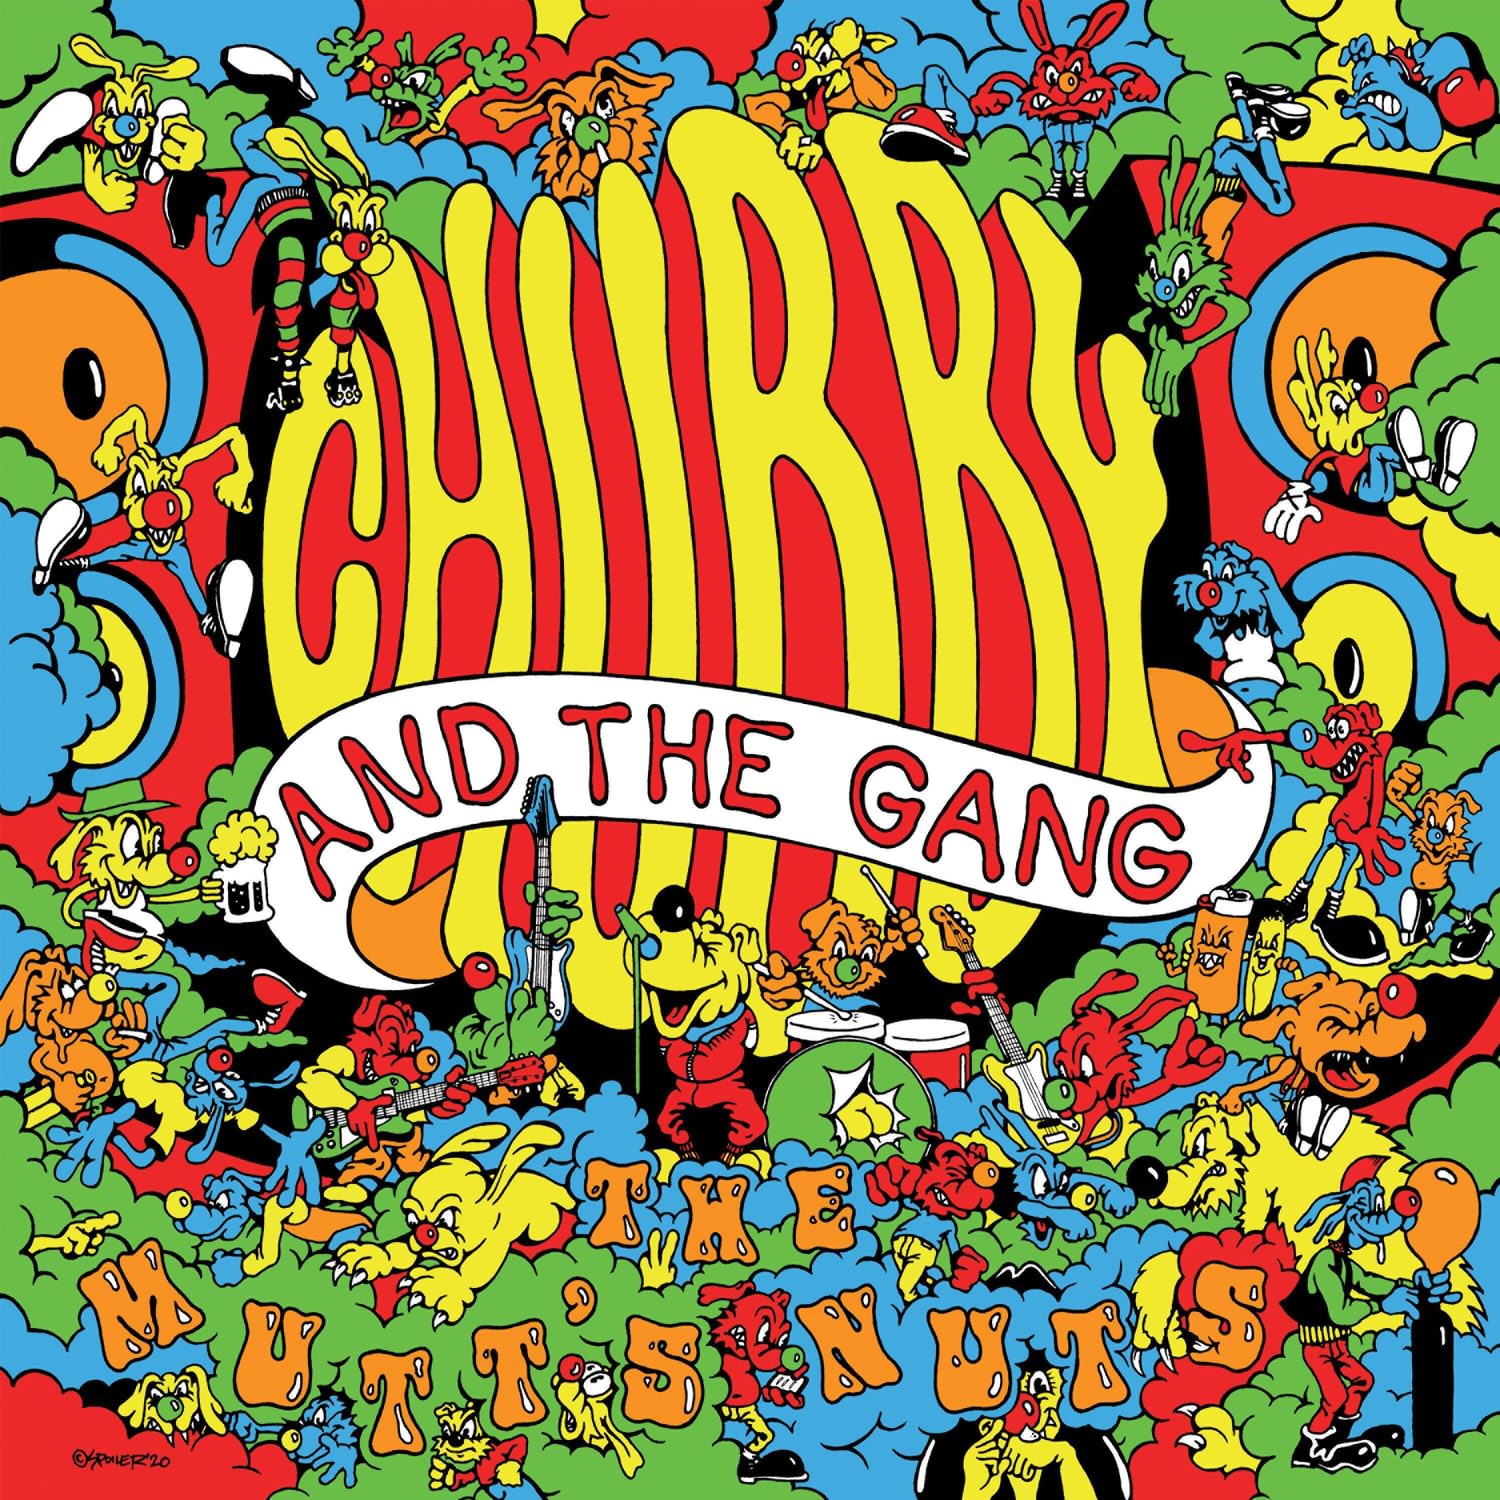 Chubby and the Gang: The Mutt's Nuts Album Review